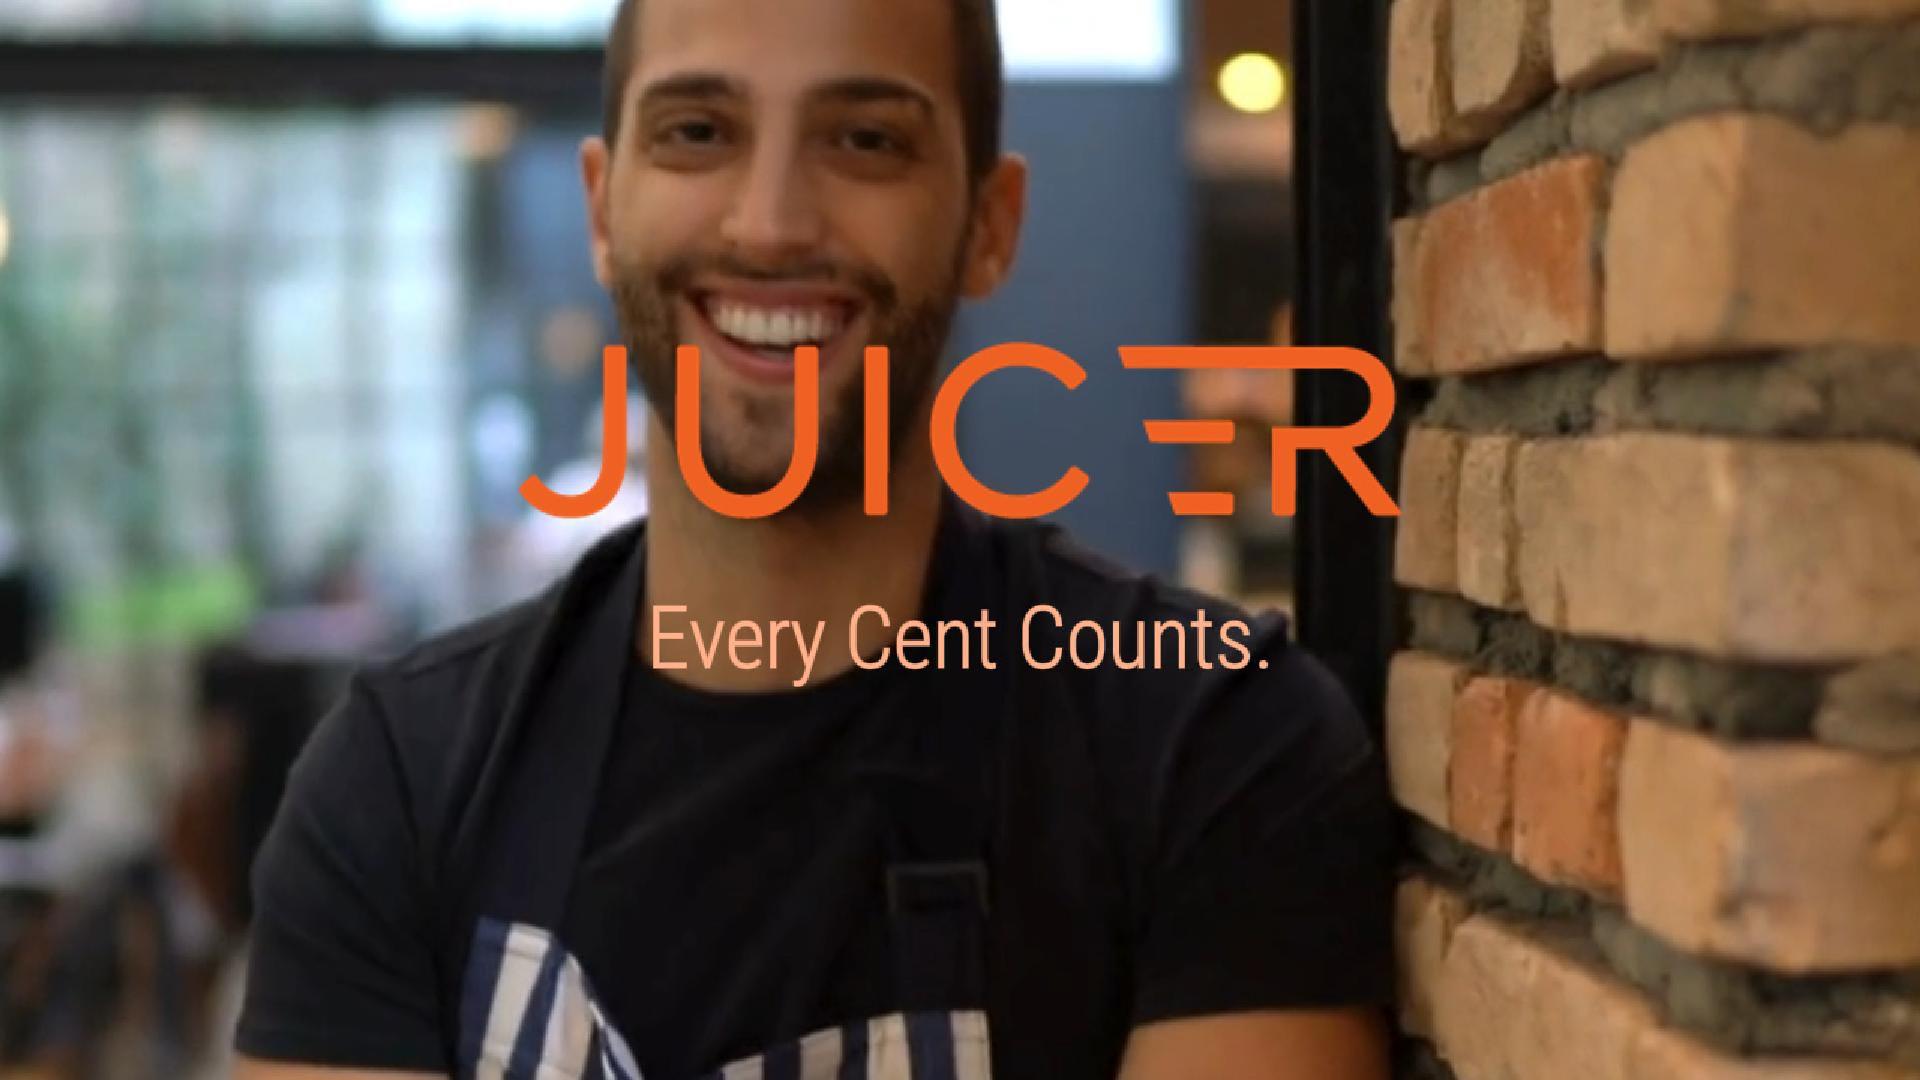 Juicer Intelligent Pricing Solutions-PGTM FIN-Cover